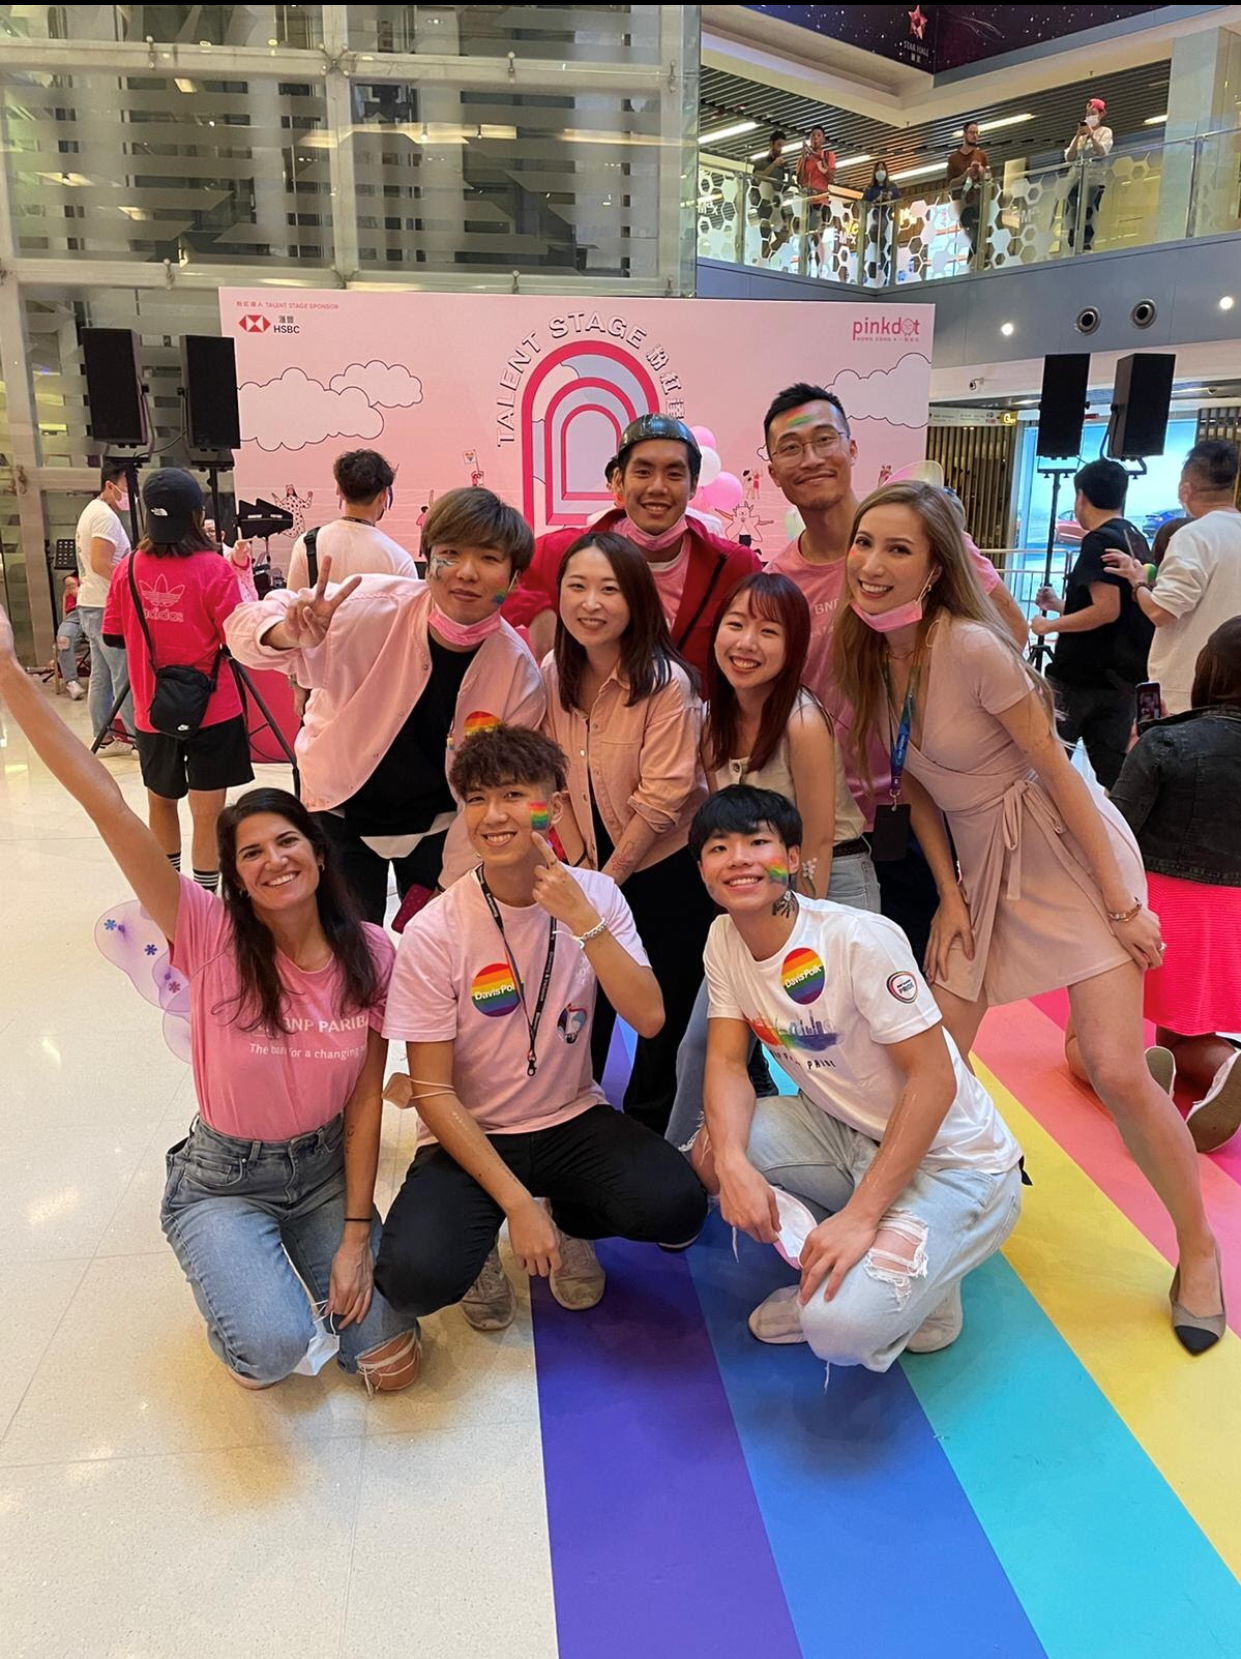 Pink Dot Event: A group of youngsters wearing in pink